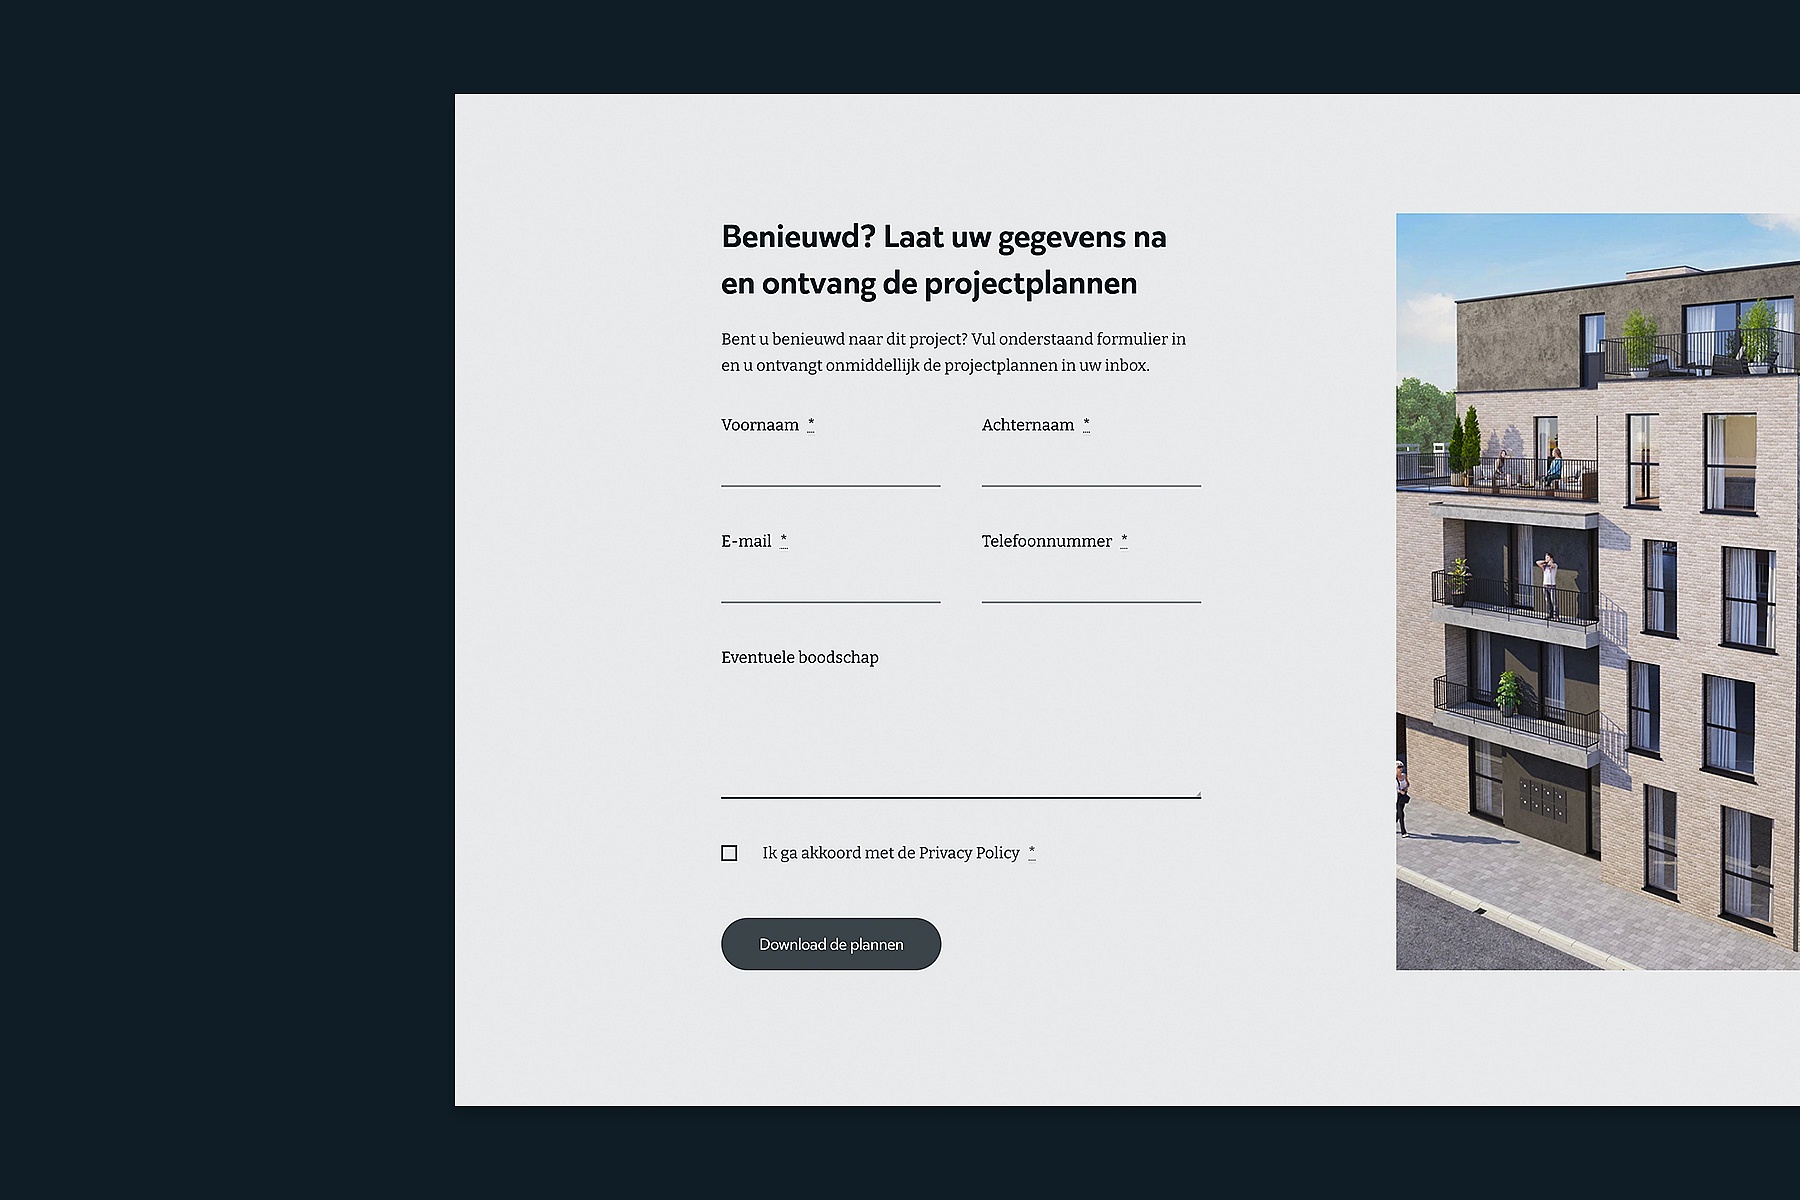 Screenshots of (details of) the website that De Paep Projectontwikkeling had made by Heave Webdesign Antwerp